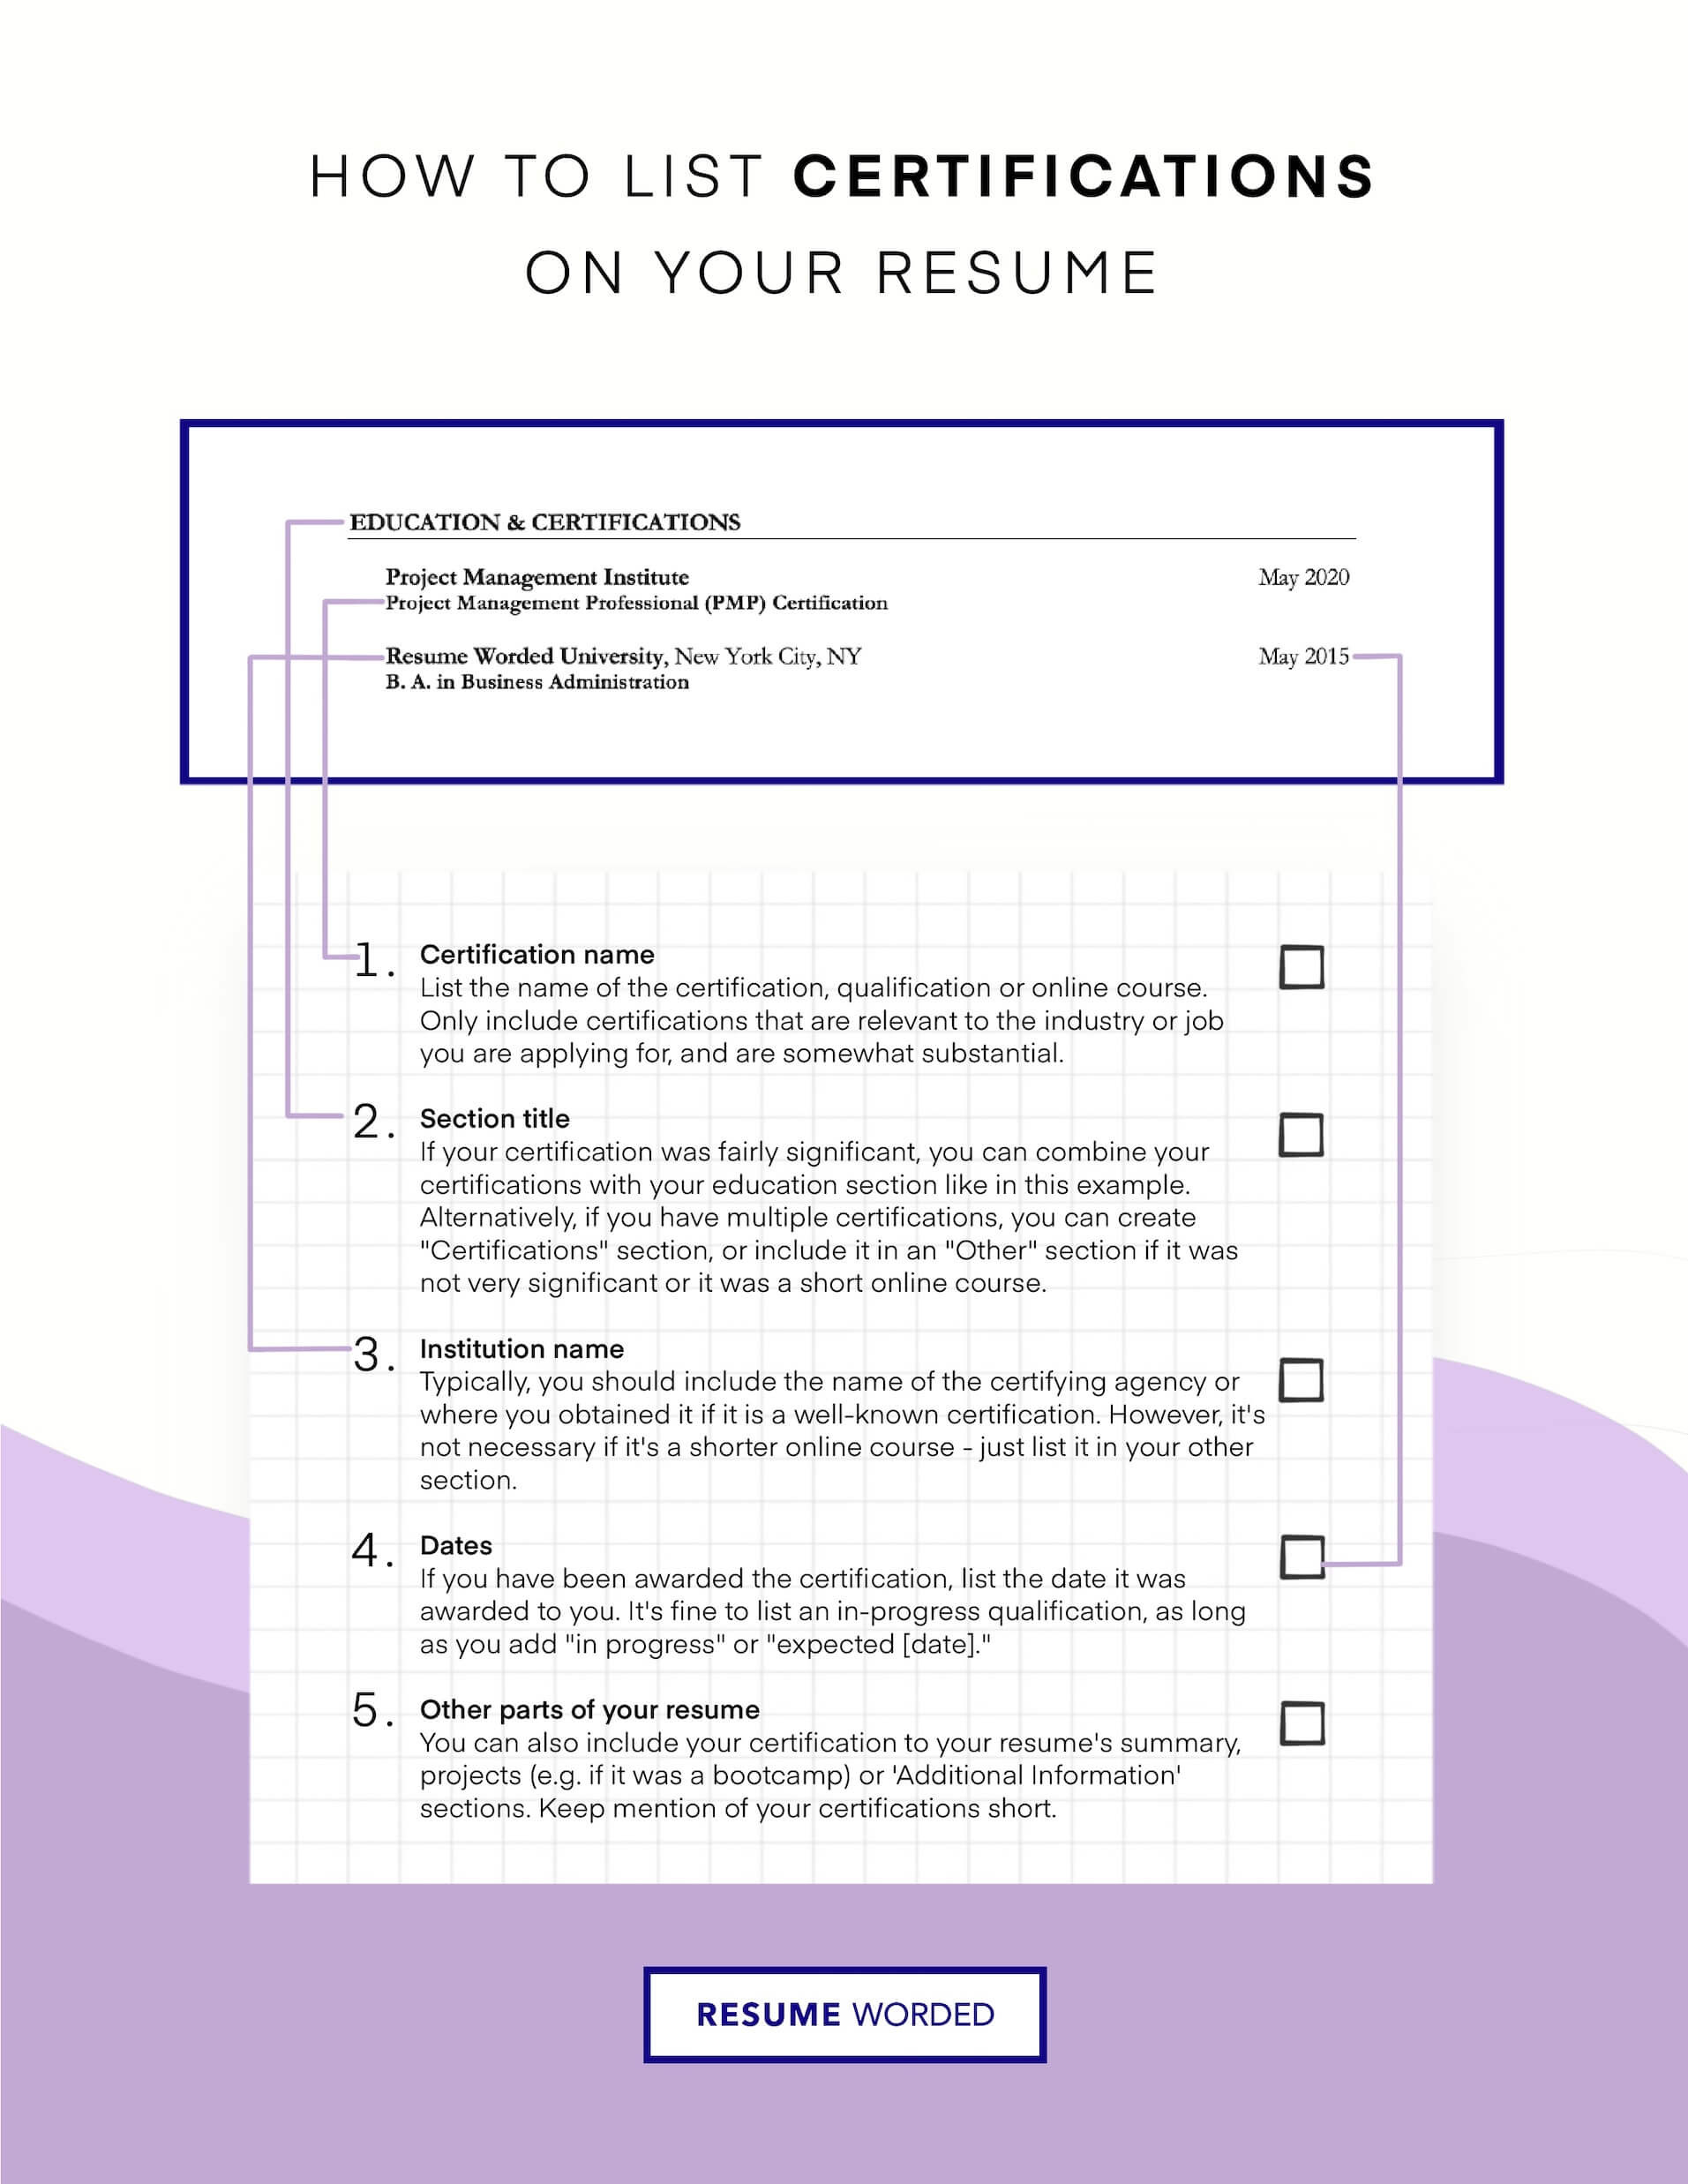 Sample Resume for Radiologic Technologist with No Experience Entry-level Radiologic Technologist Resume Example for 2022 …